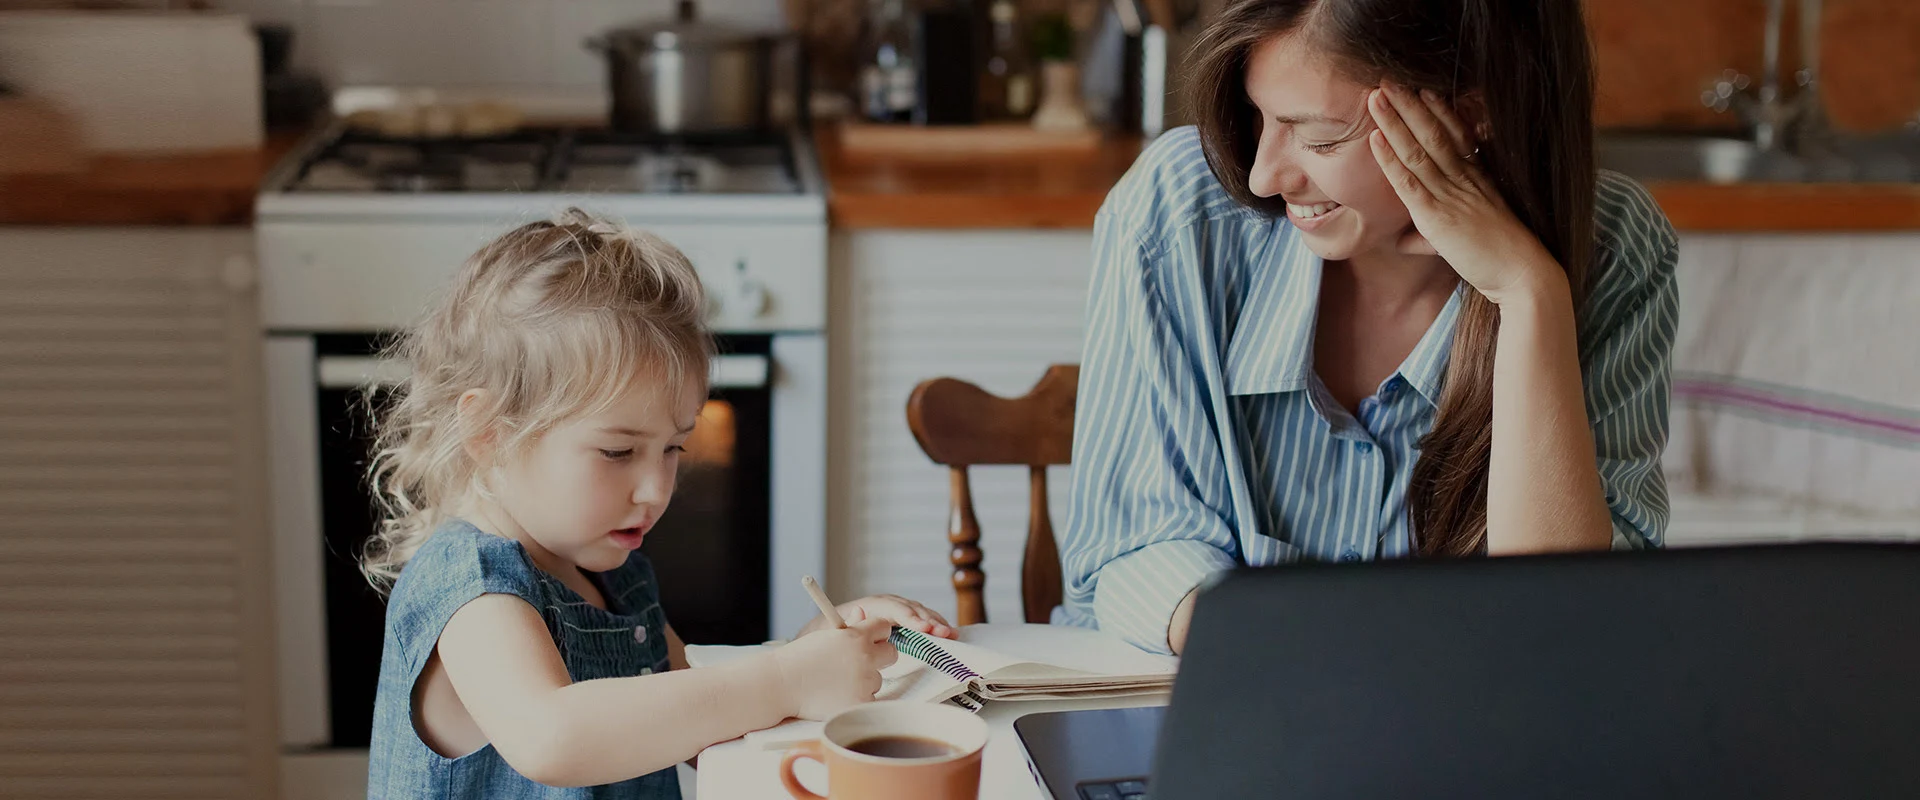 mother enjoying time with kid while on laptop